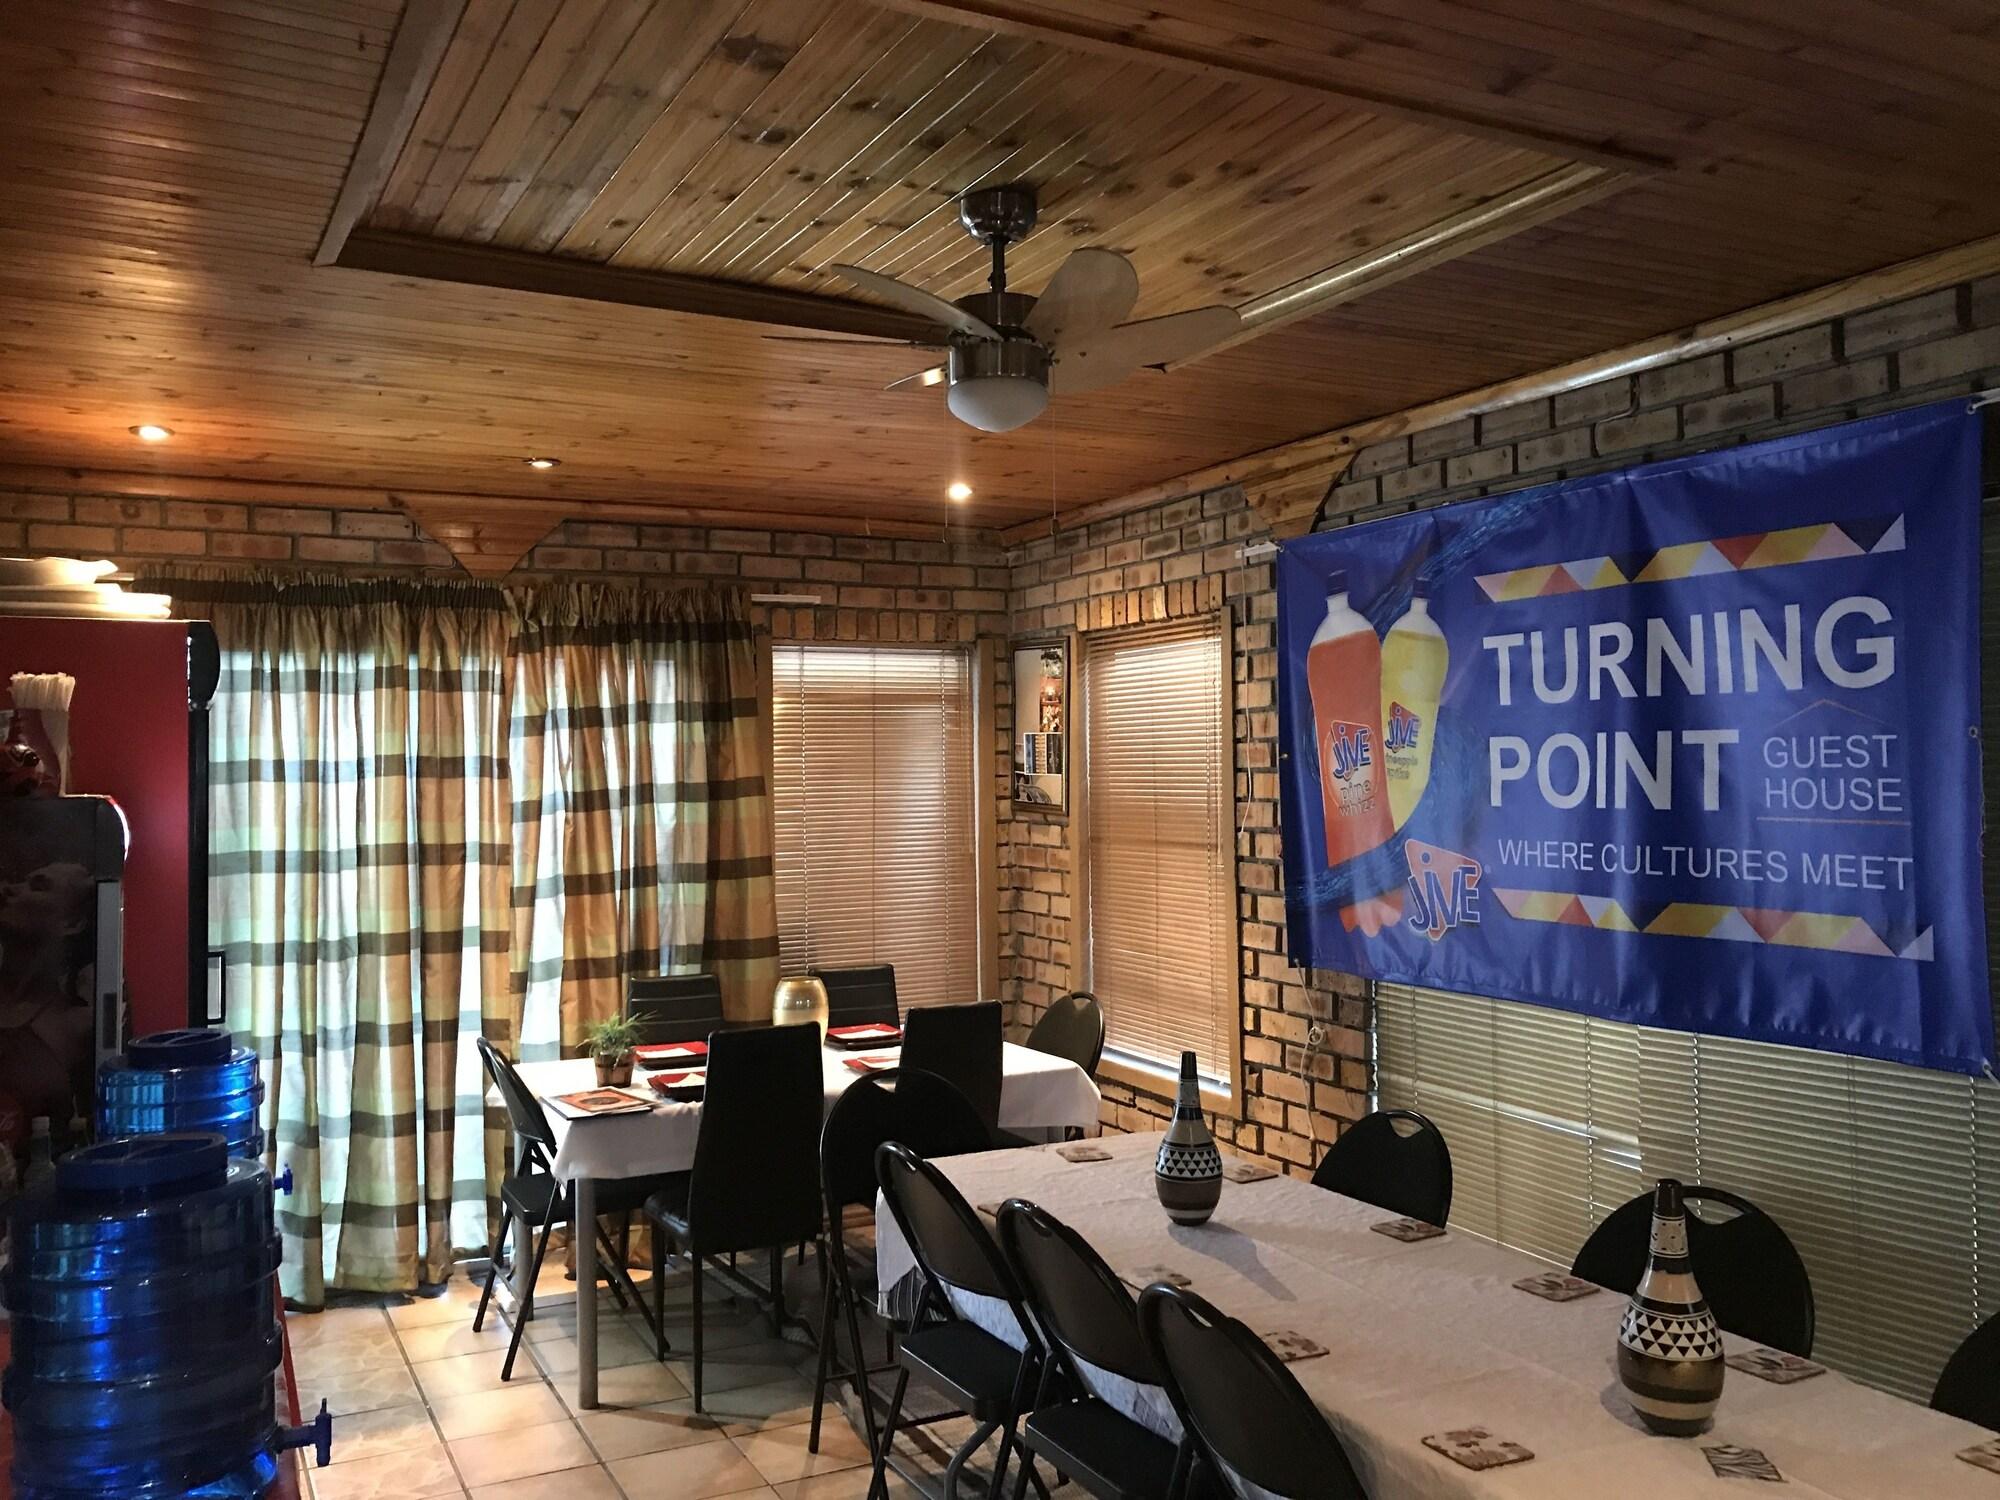 Turningpoint Bed & Breakfast